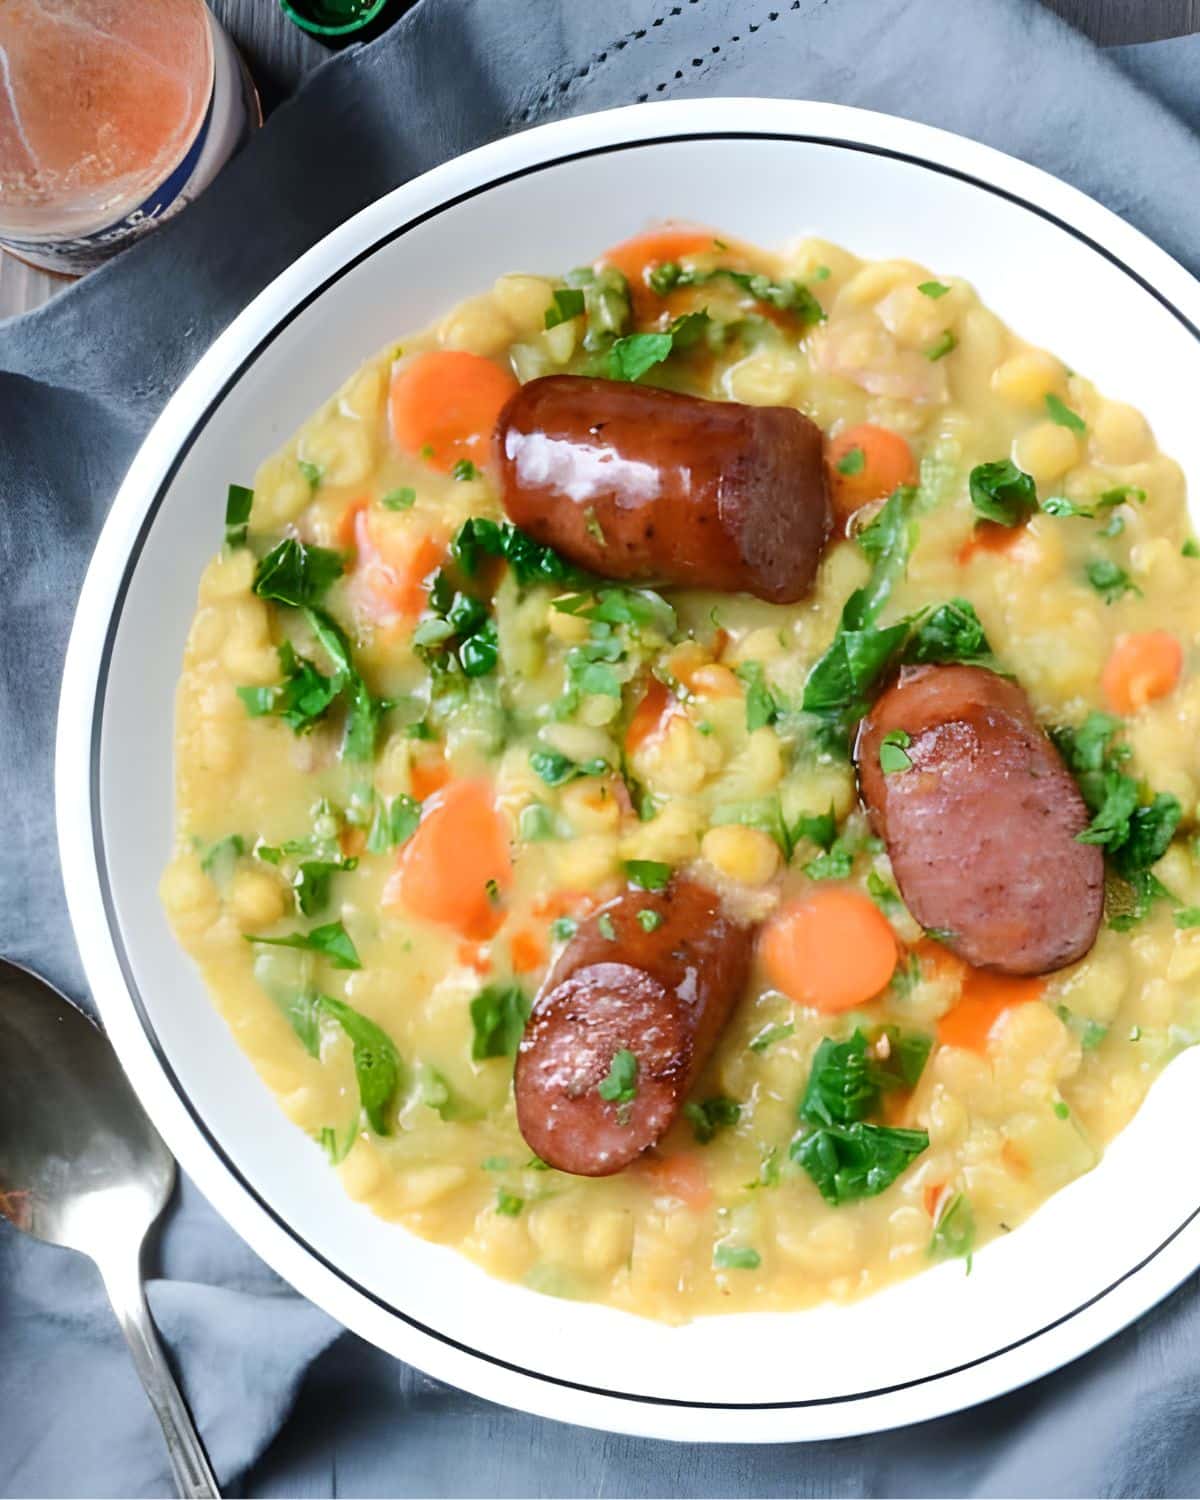 Yellow peas and smoked sausage in a bowl.